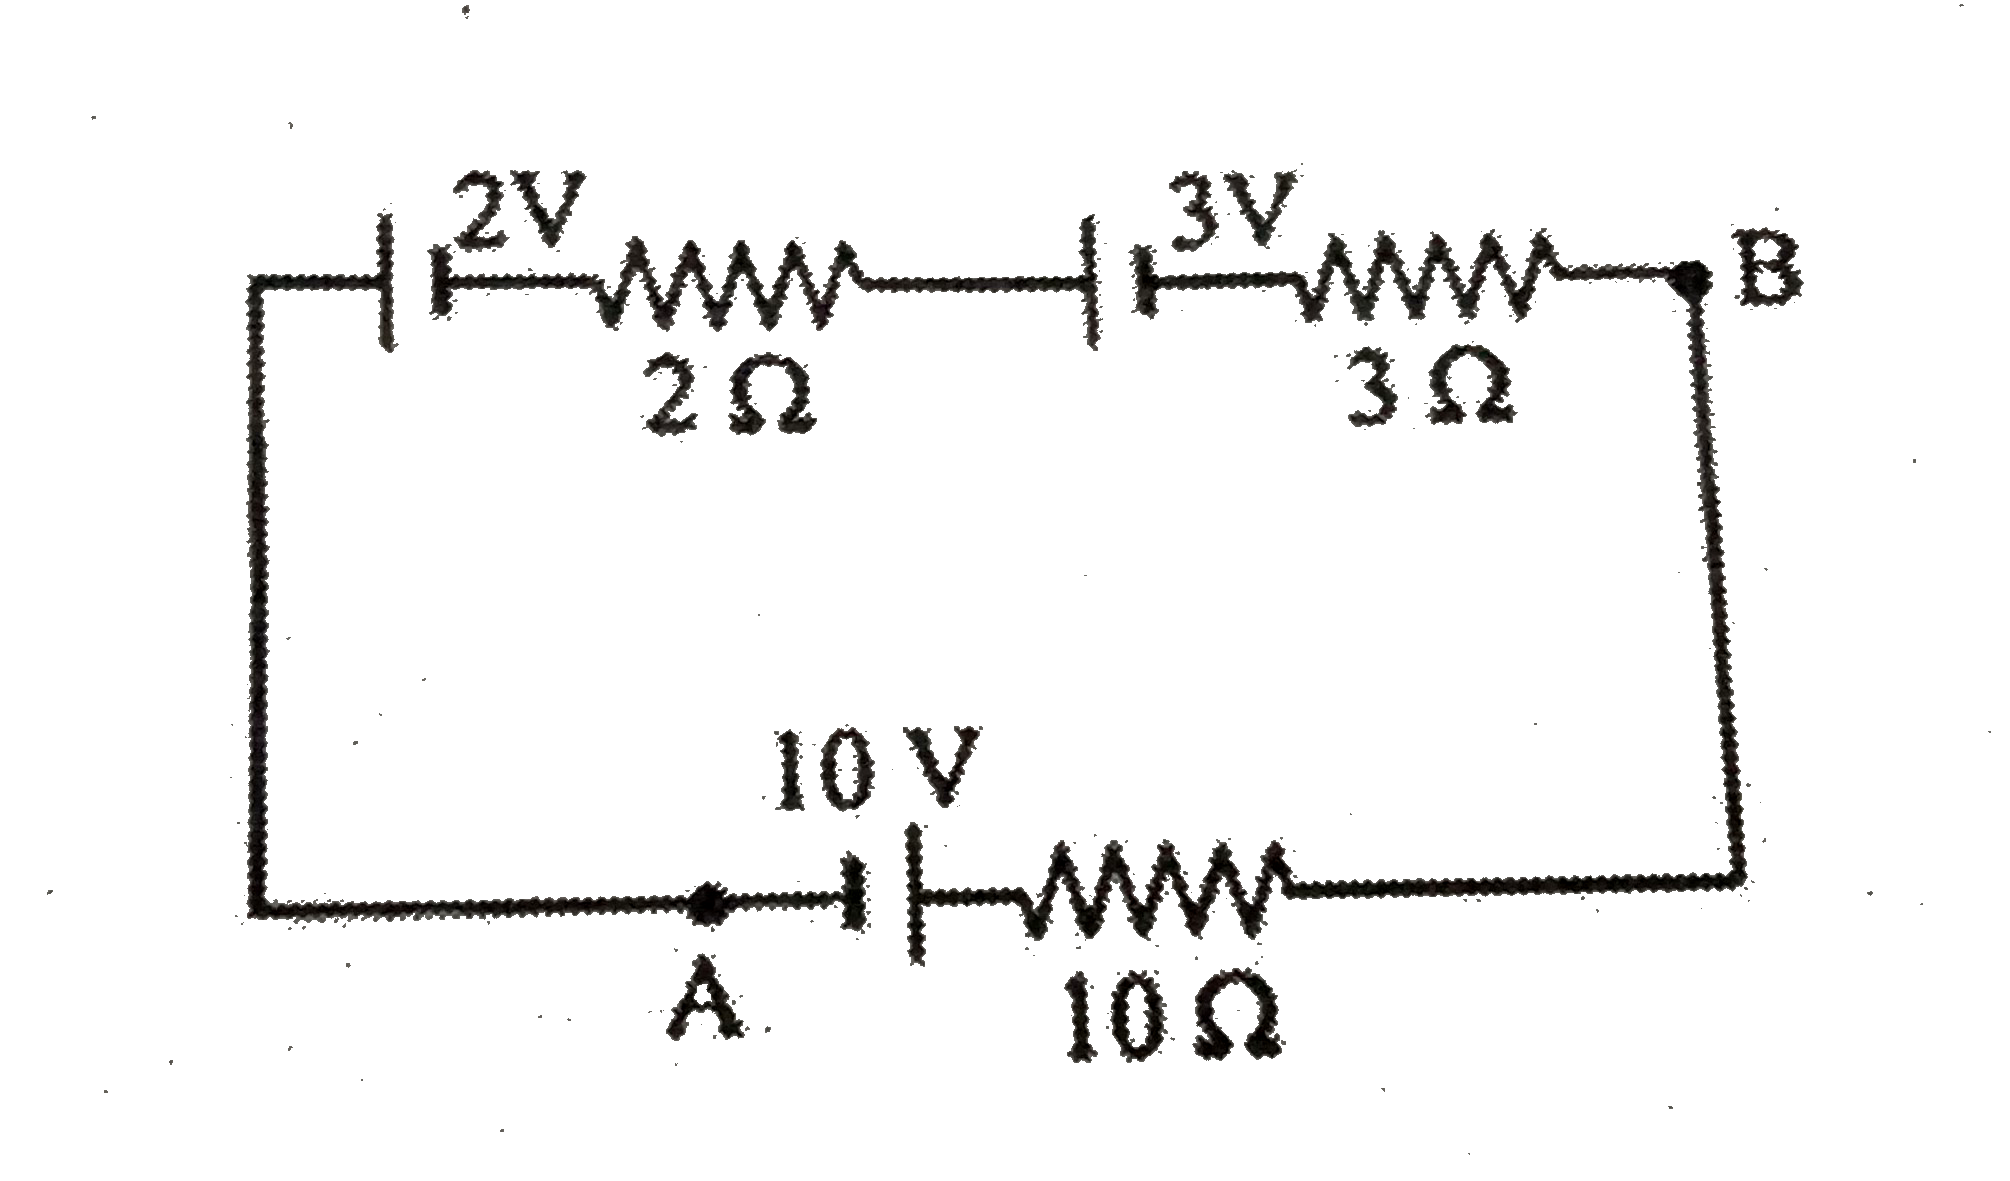 In the circuit below, the potential difference between A and B is